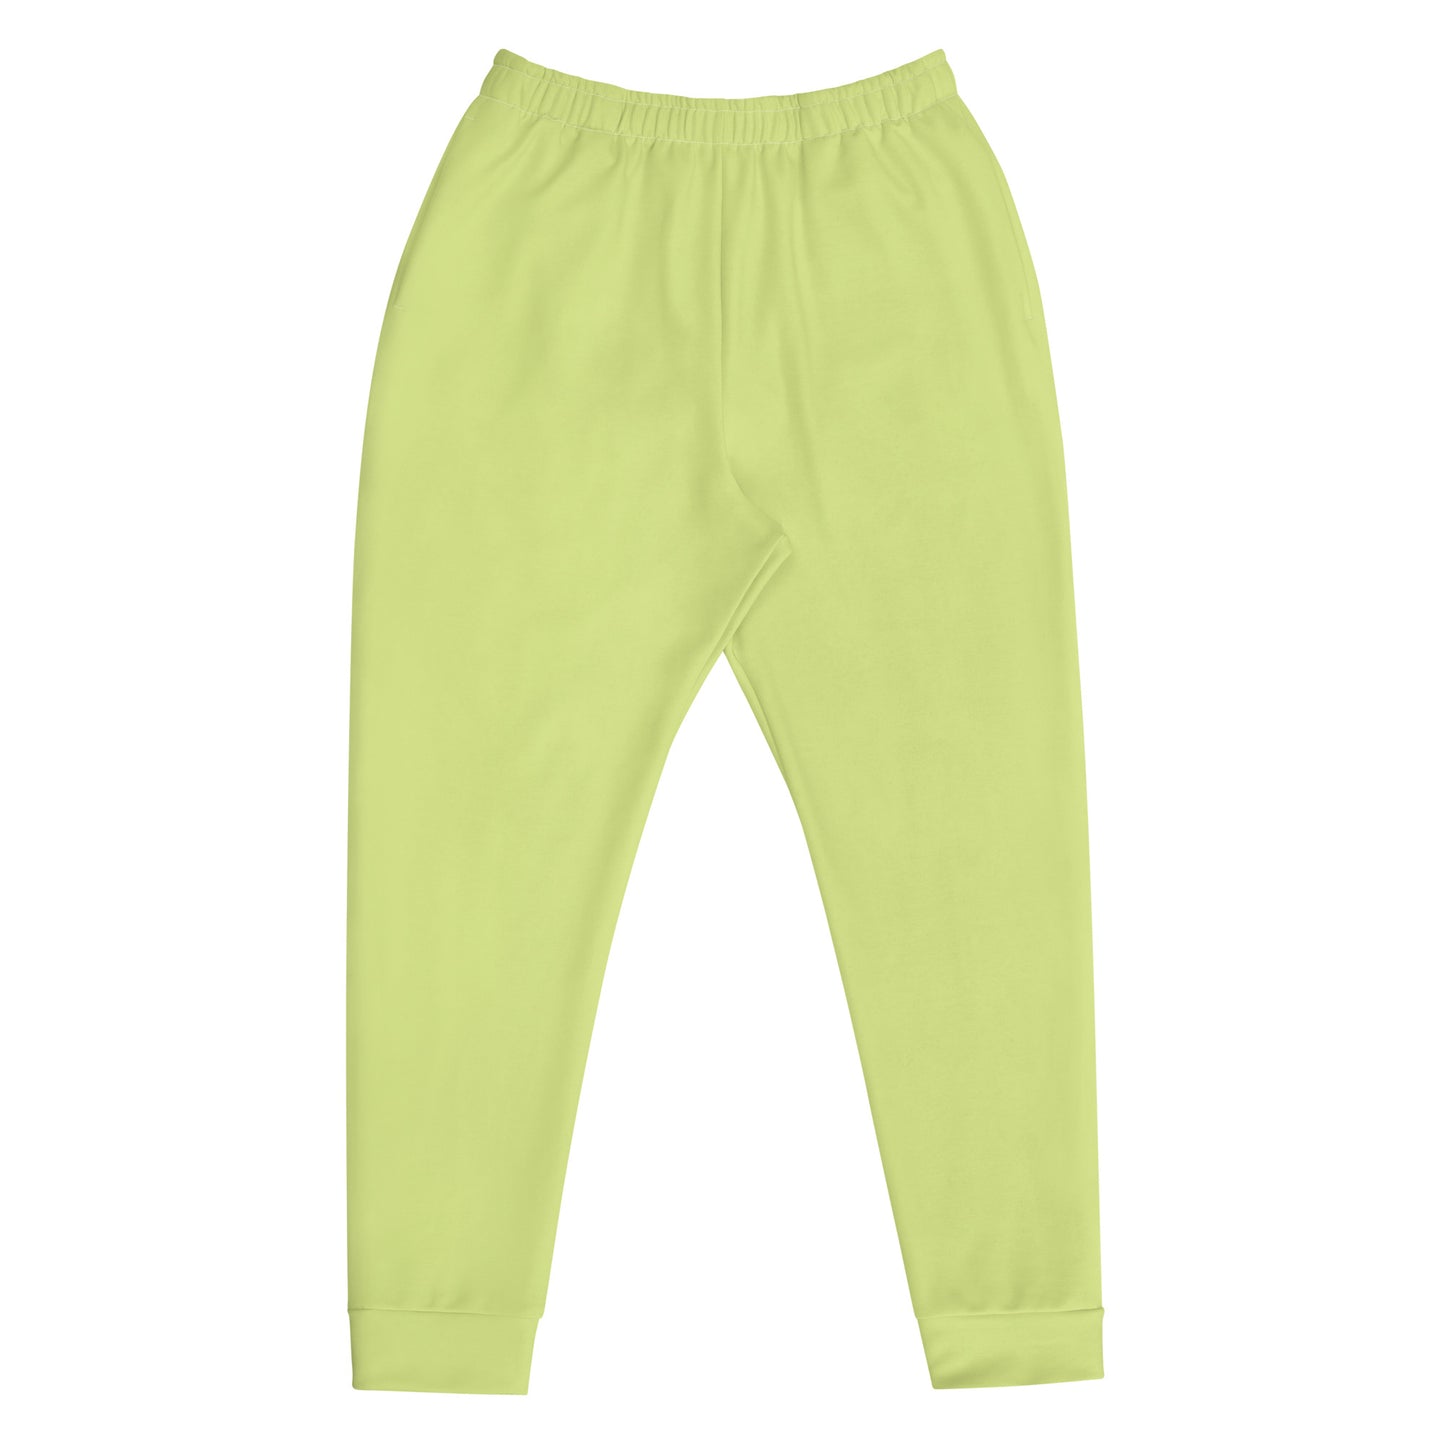 Lime Climate Change Global Warming Statement - Sustainably Made Men's Jogger